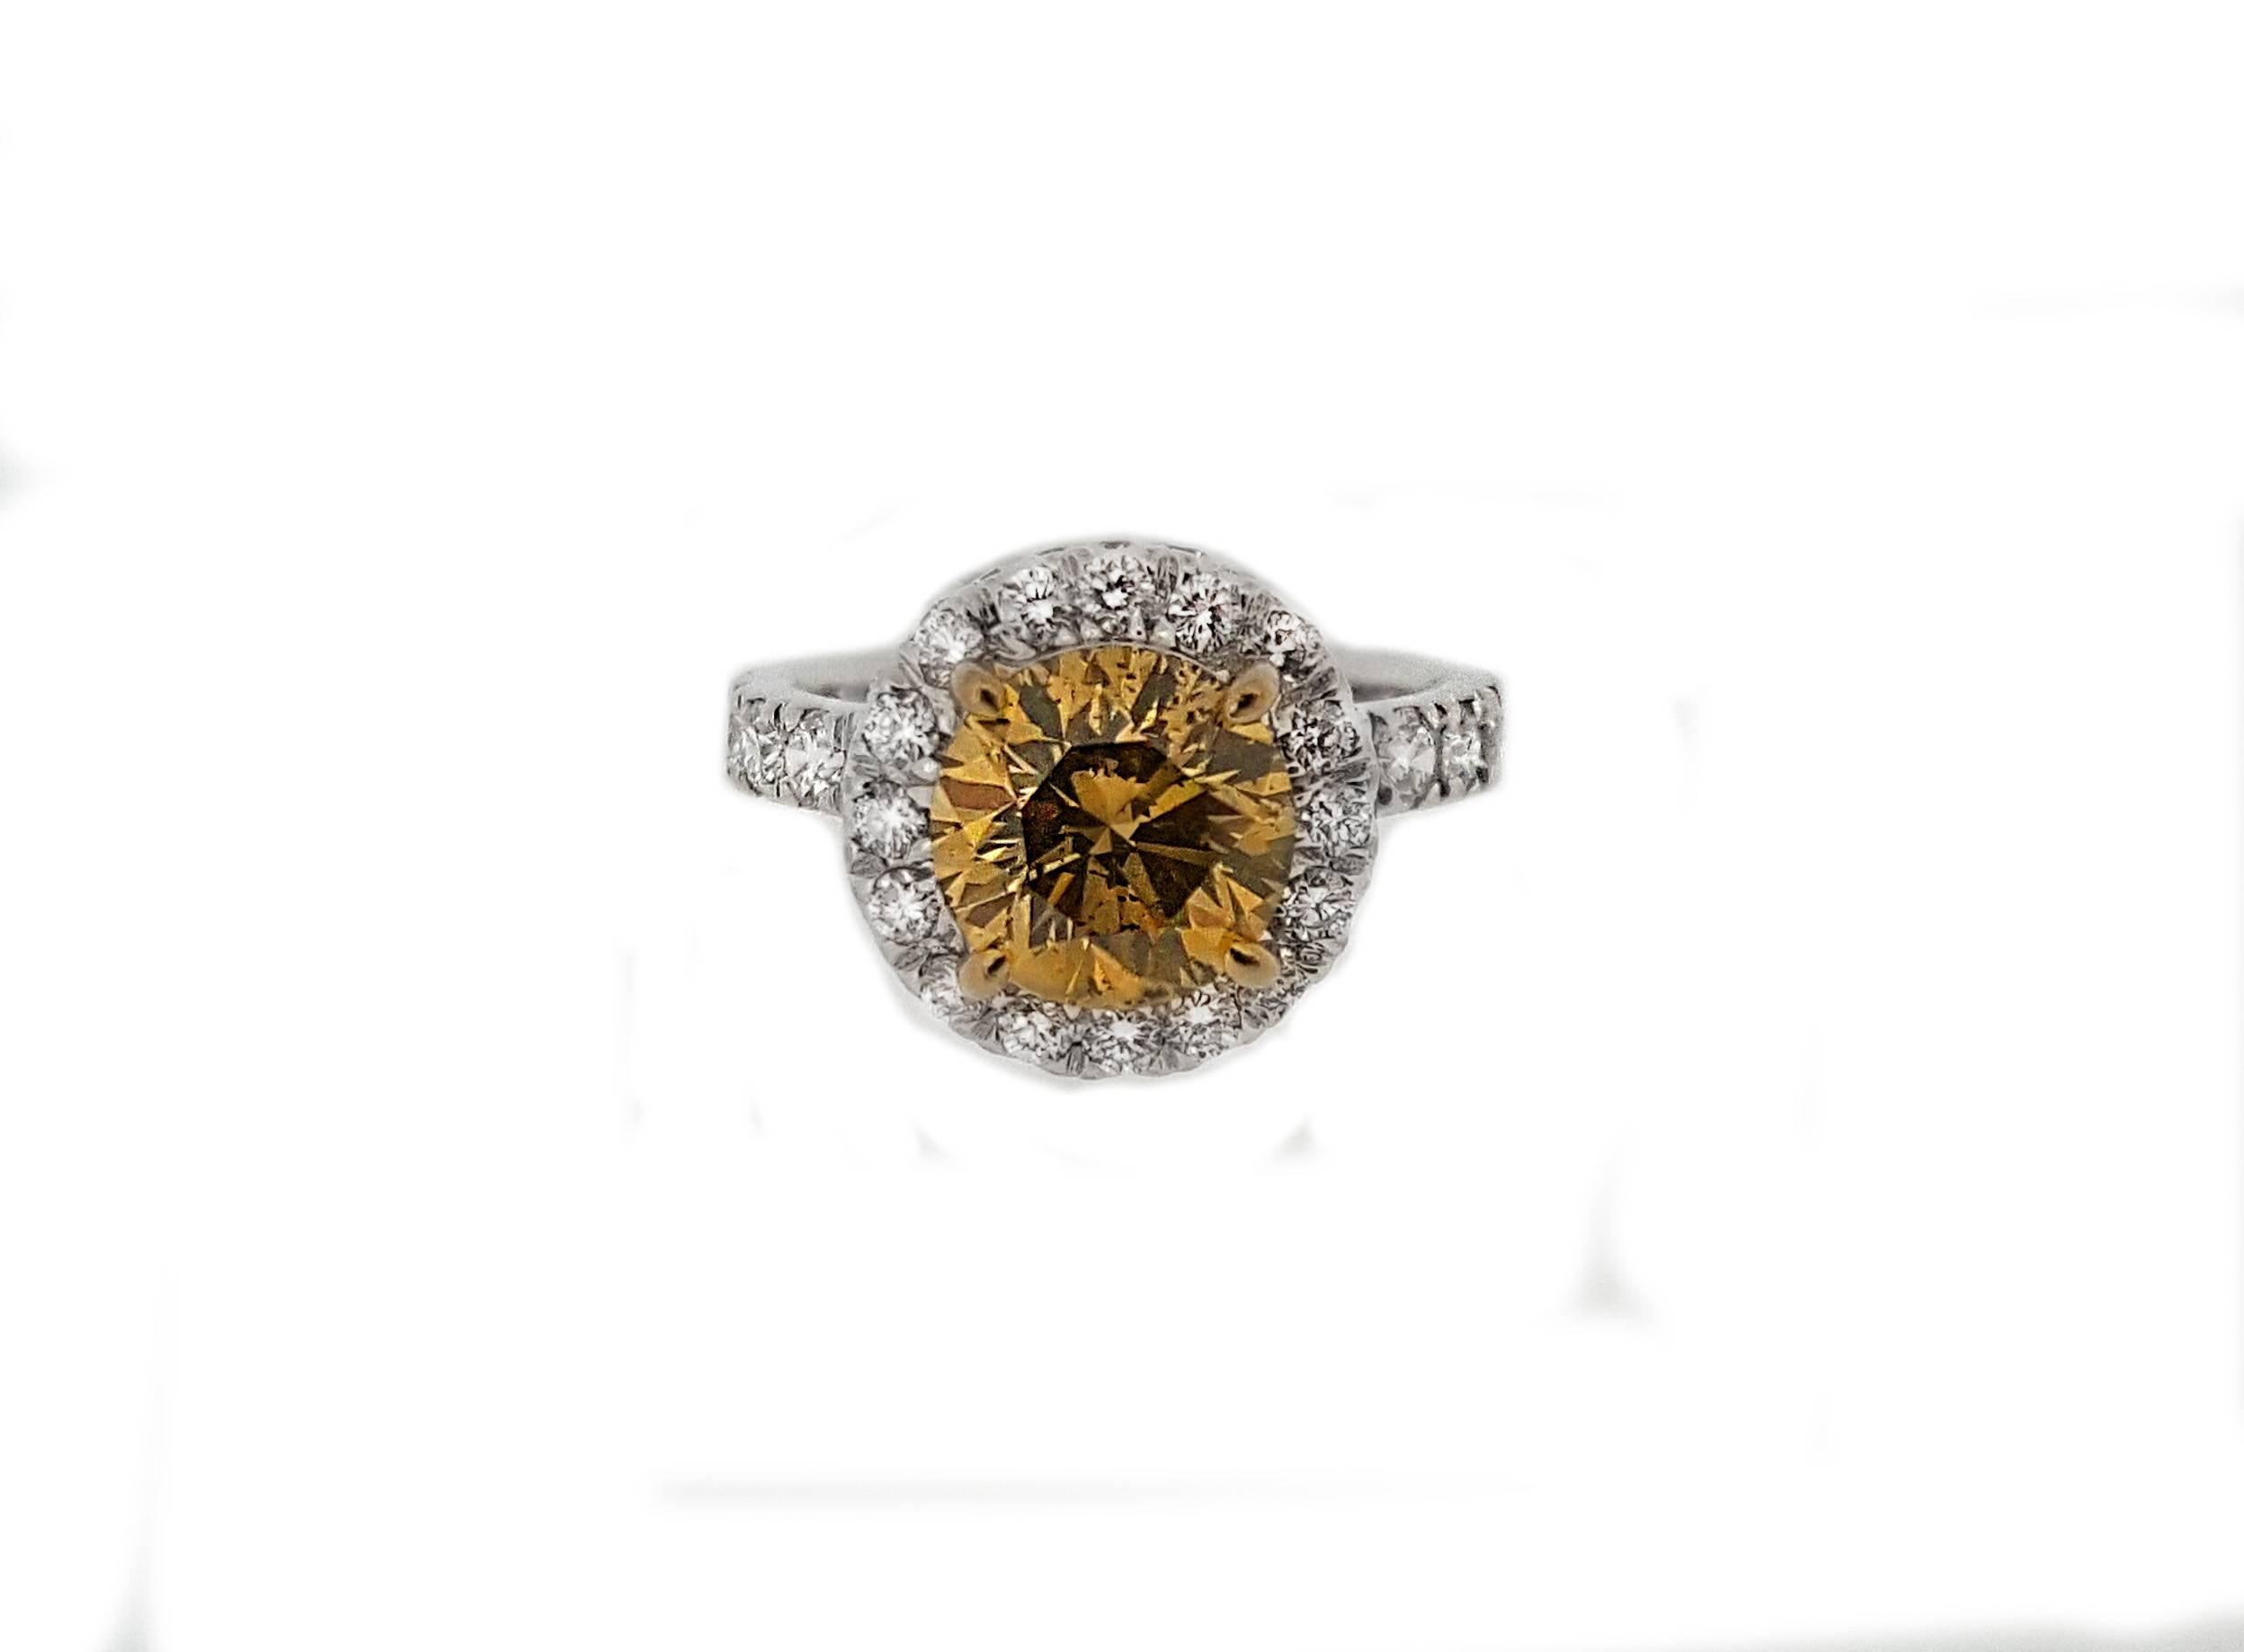 A sparkling 1.53ct brown diamond sits in the center of a delicate halo of white diamonds in a high polished platinum mounting. Diamonds are set along the entire shank in an eternity style, totaling approximately 1.50ctw. The ring is a US size 3. 